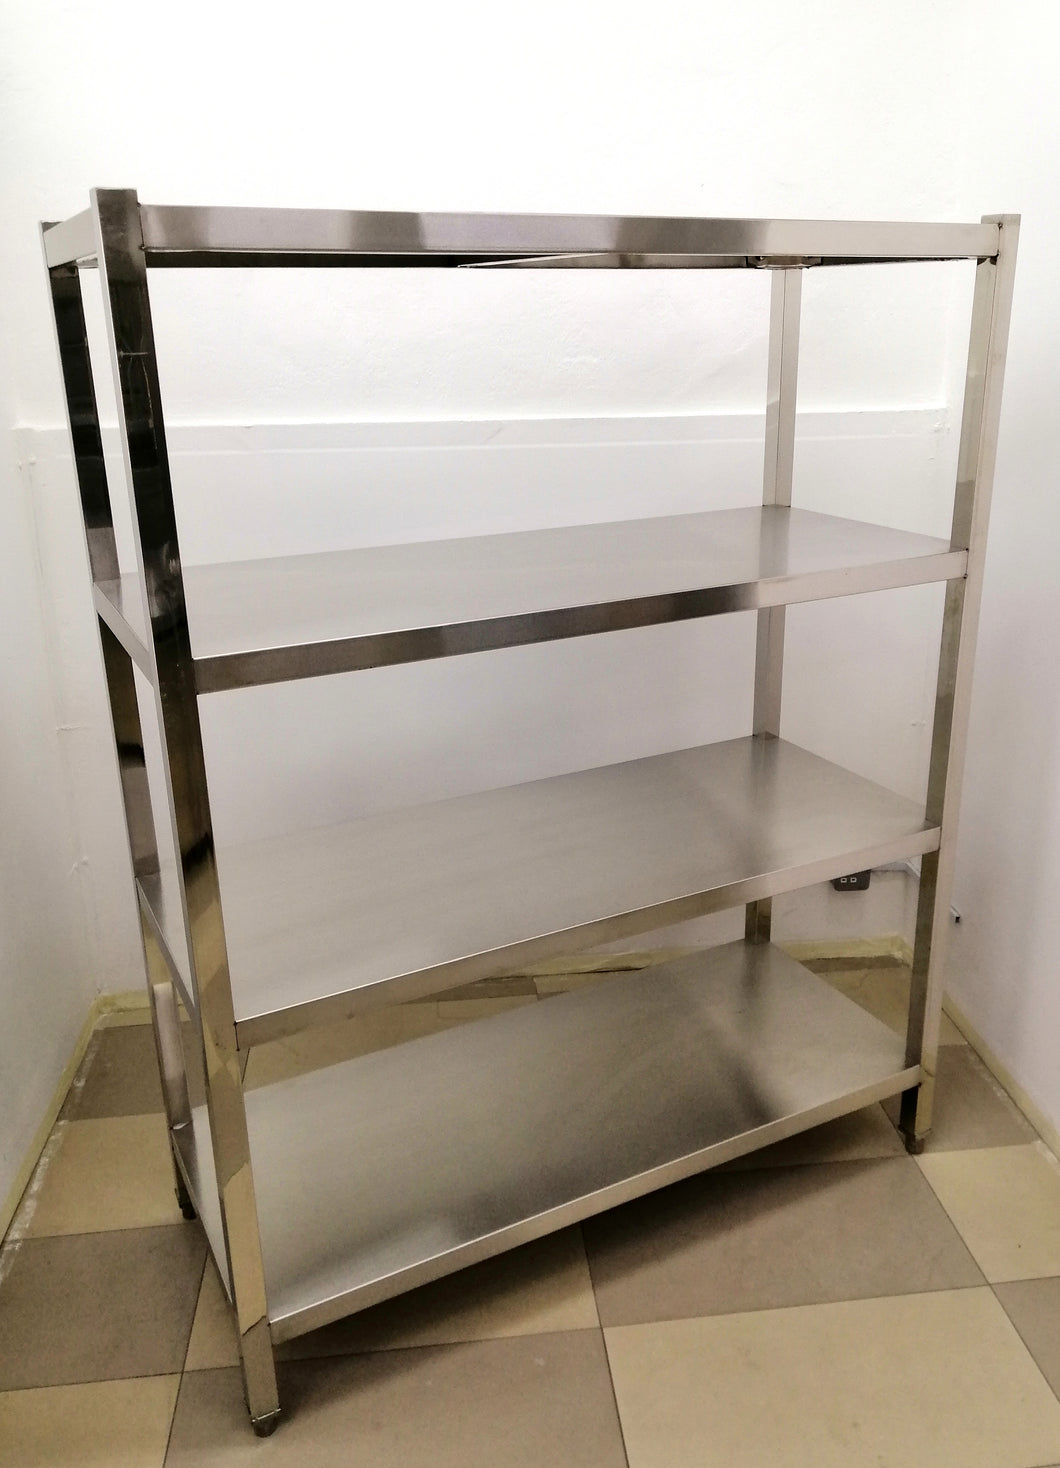 4-Tier Stainless Steel Rack / Shelf For Kitchen / Canteen / Cafeteria / Tray Return / Office / Storage